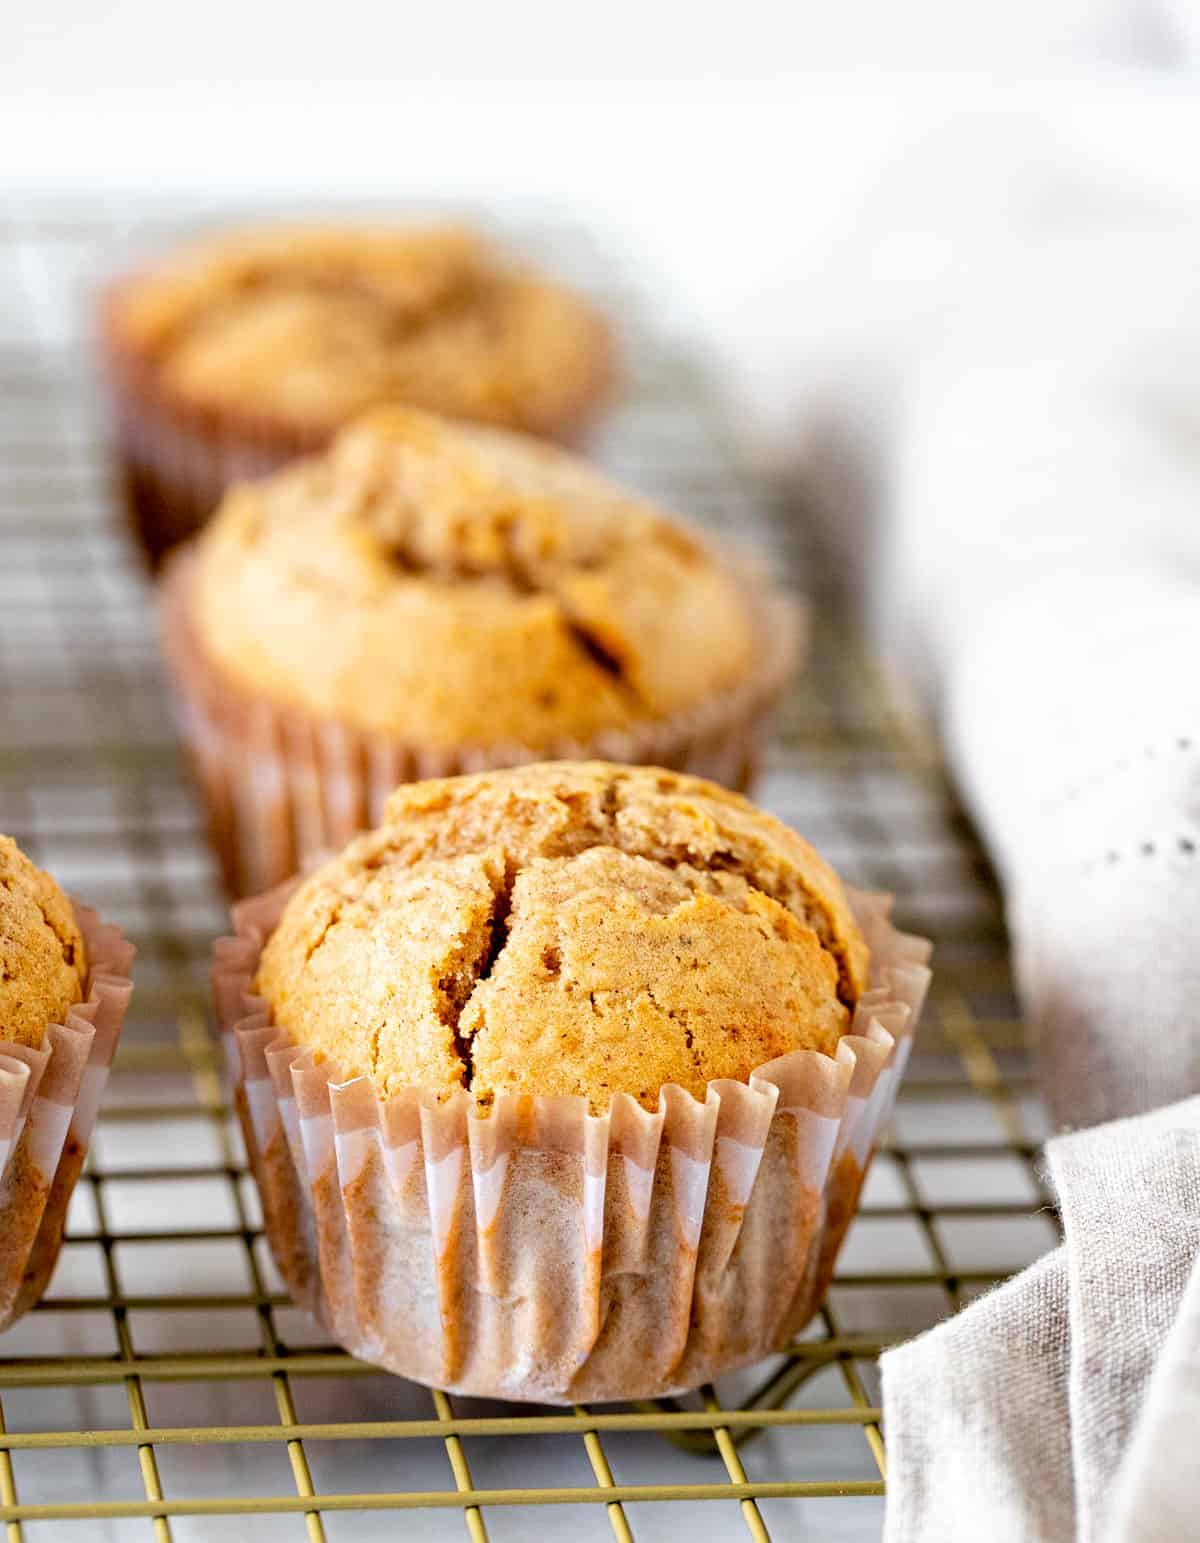 Row of applesauce muffins in paper liners on a wire rack.